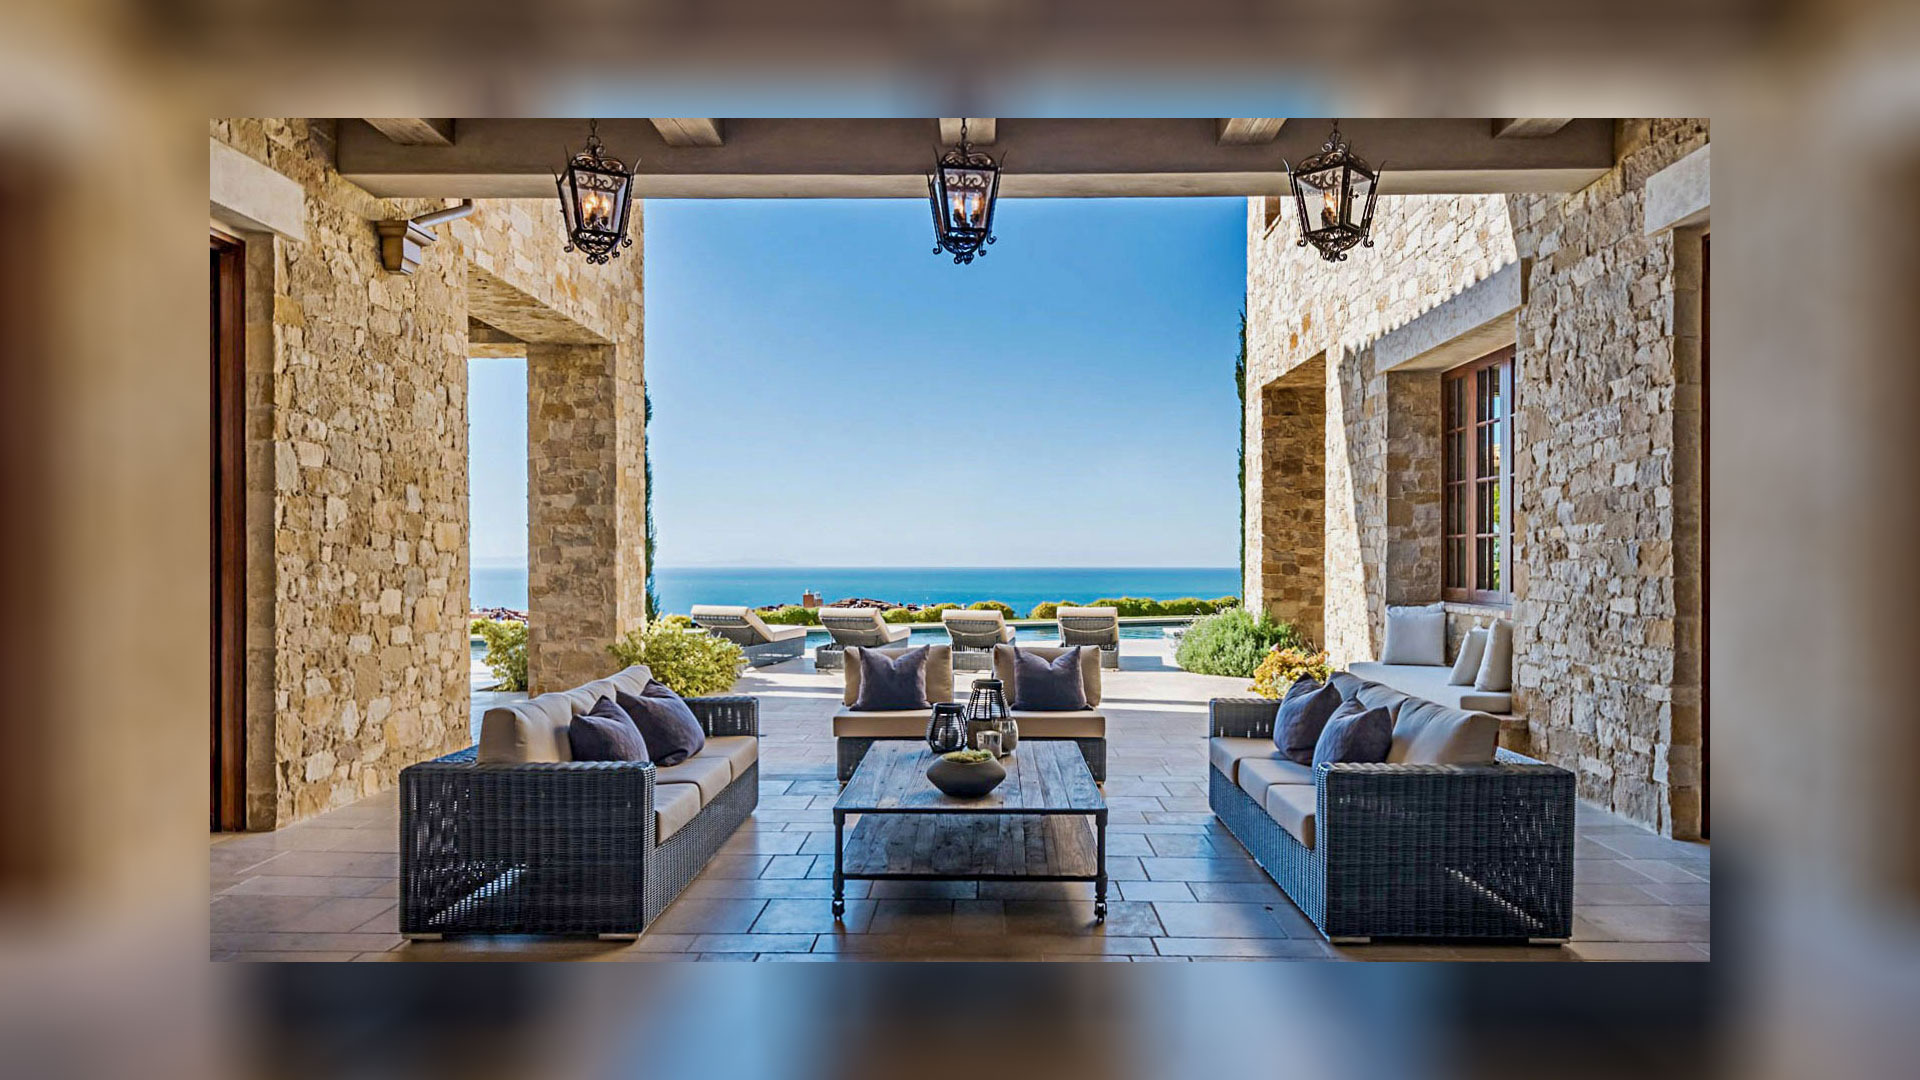 exterior seating area with ocean view Tuscan Blend Rubble thin veneer installed on exterior walls